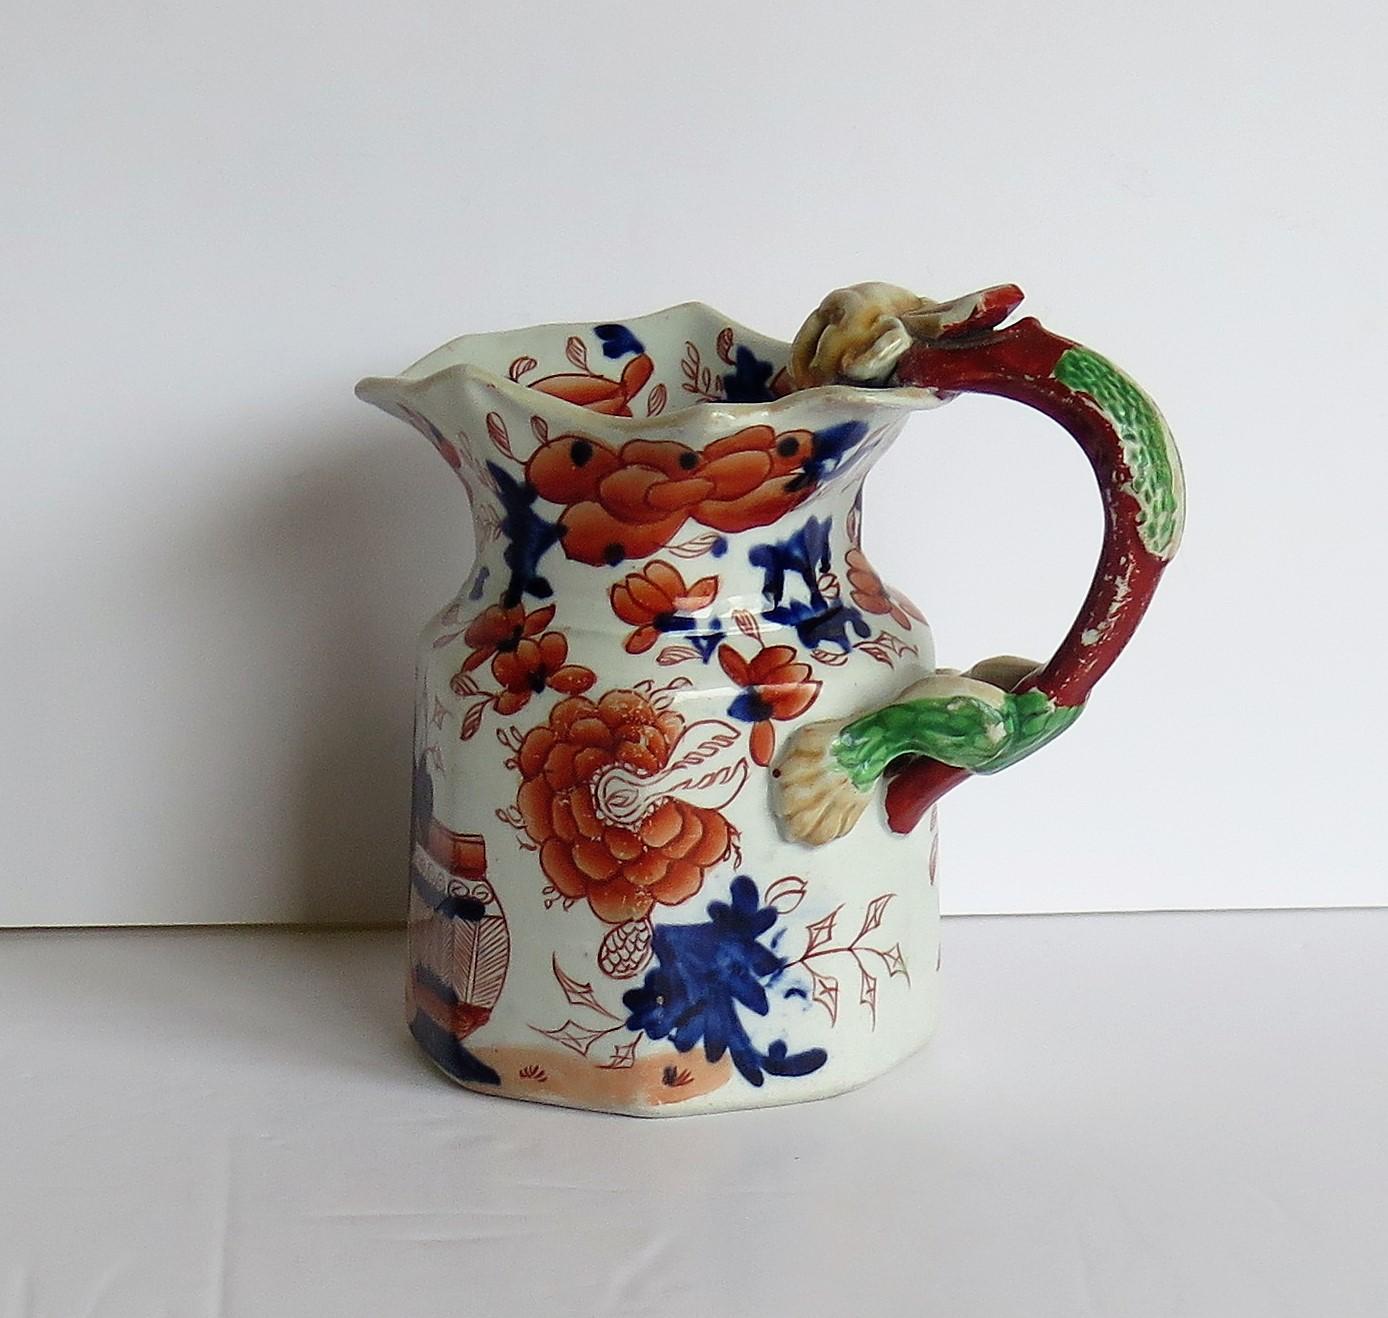 Hand-Painted Very Early Mason's Ironstone Jug or Pitcher Japan Basket Pattern, circa 1815